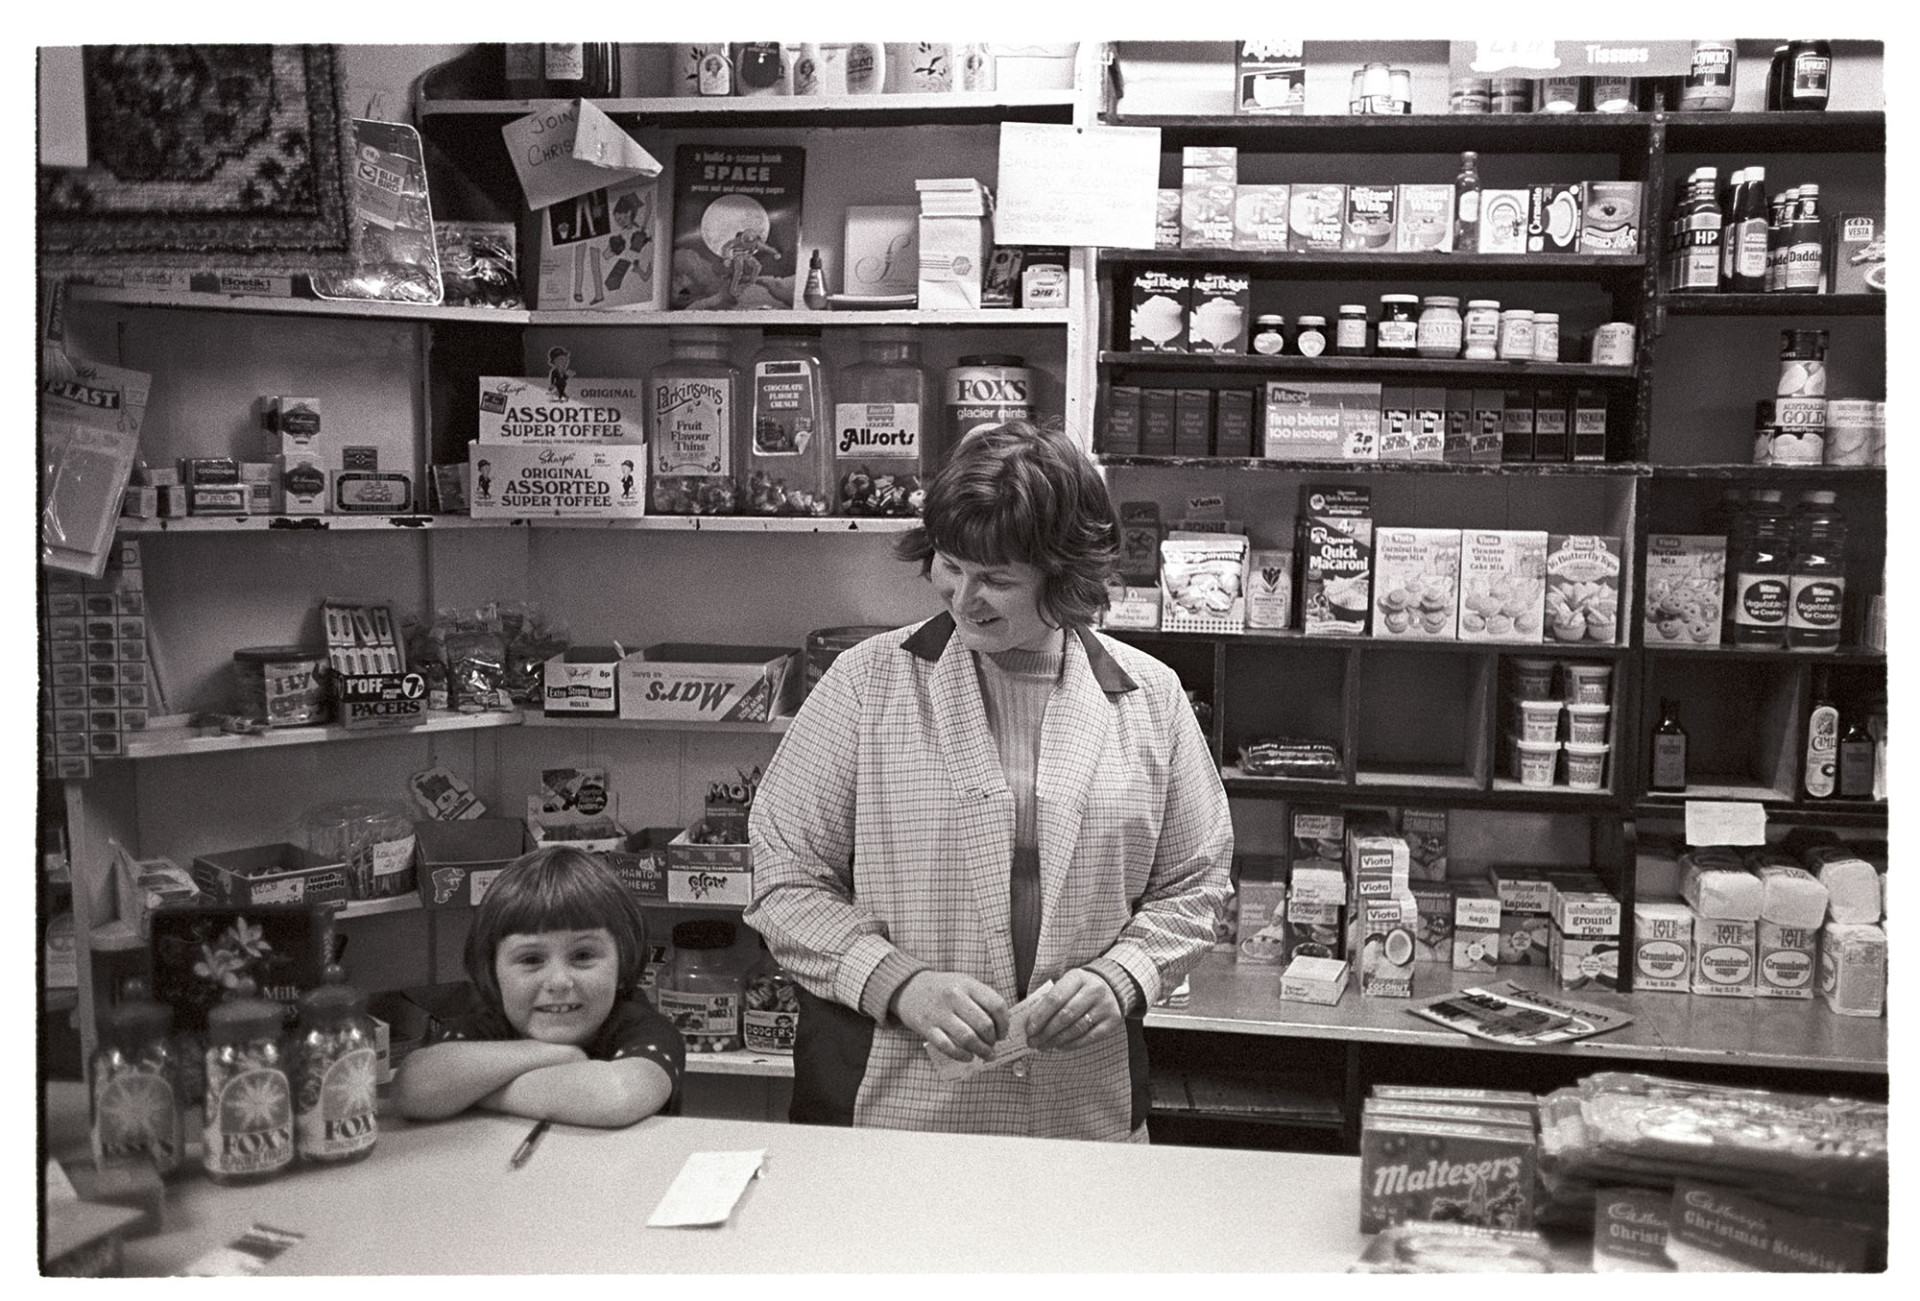 Interior of village shop with woman proprietor and daughter. 
[Christine Keogh, the proprietor of the General Stores at Merton, and her daughter stood behind the counter of the shop. Various good are displayed on shelves behind the counter, including sweets, teabags and cupcake mixes.]